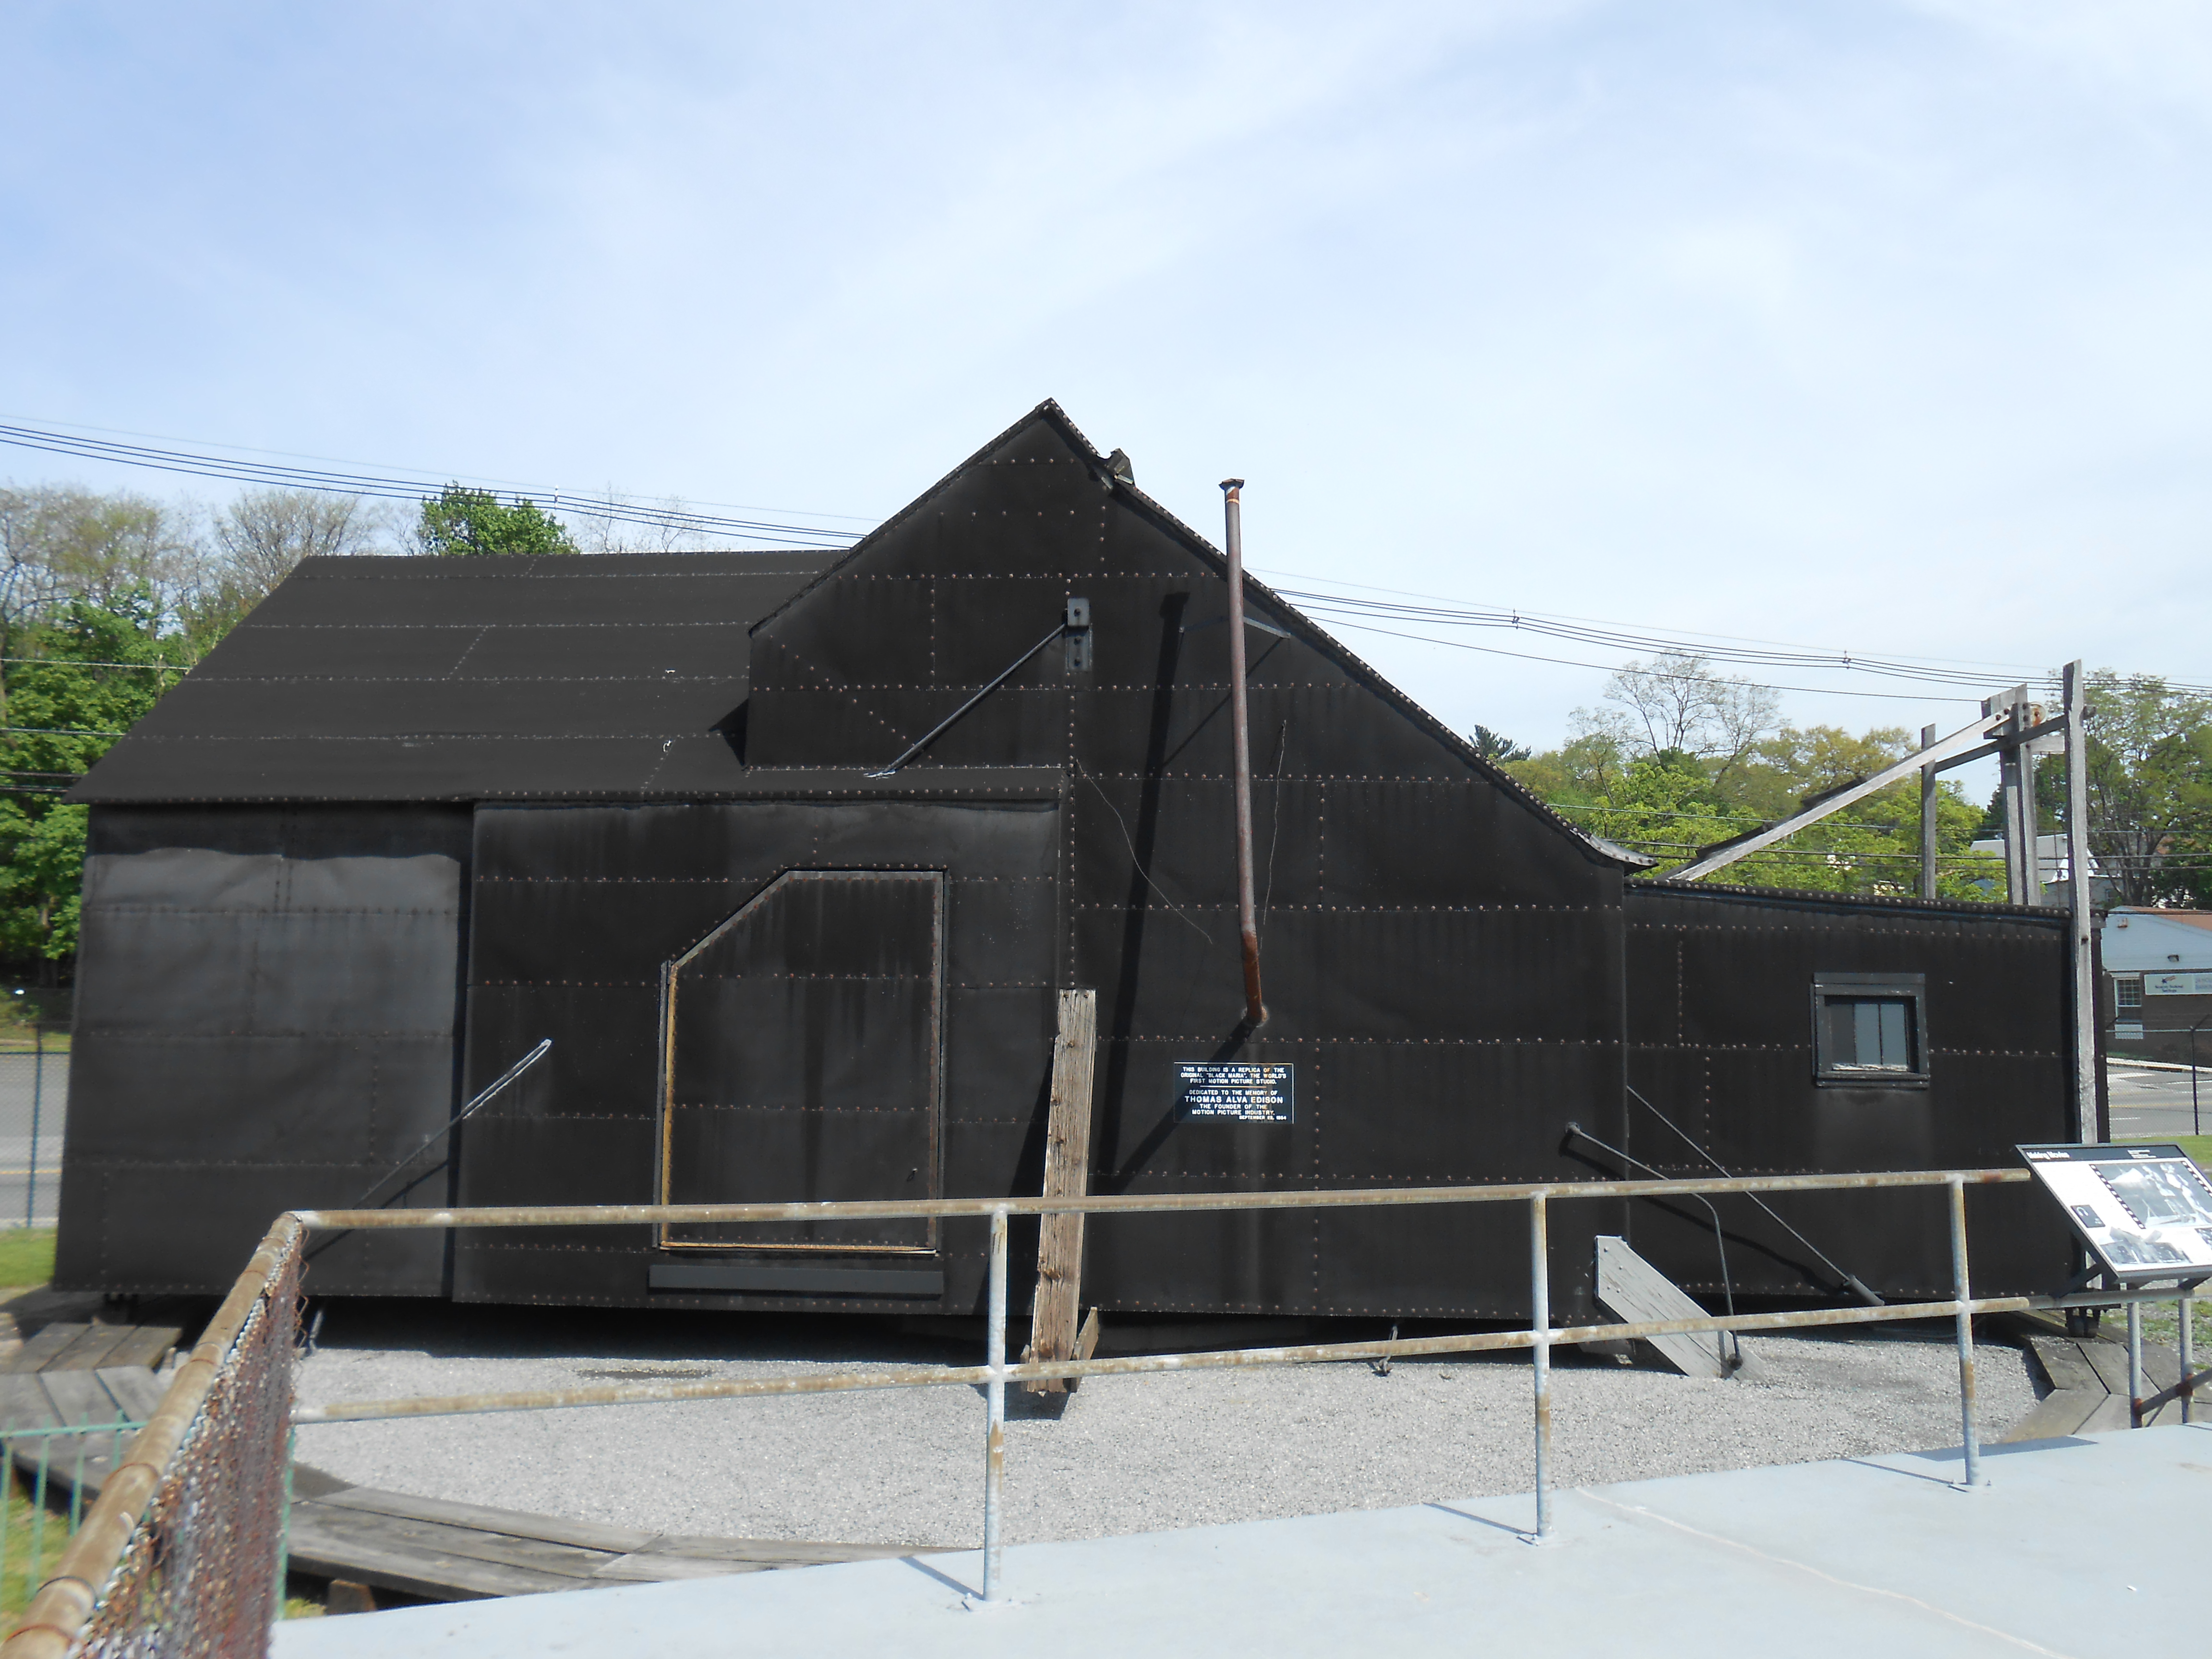 Large black building covered in tar paper surrounded by a barrier fence